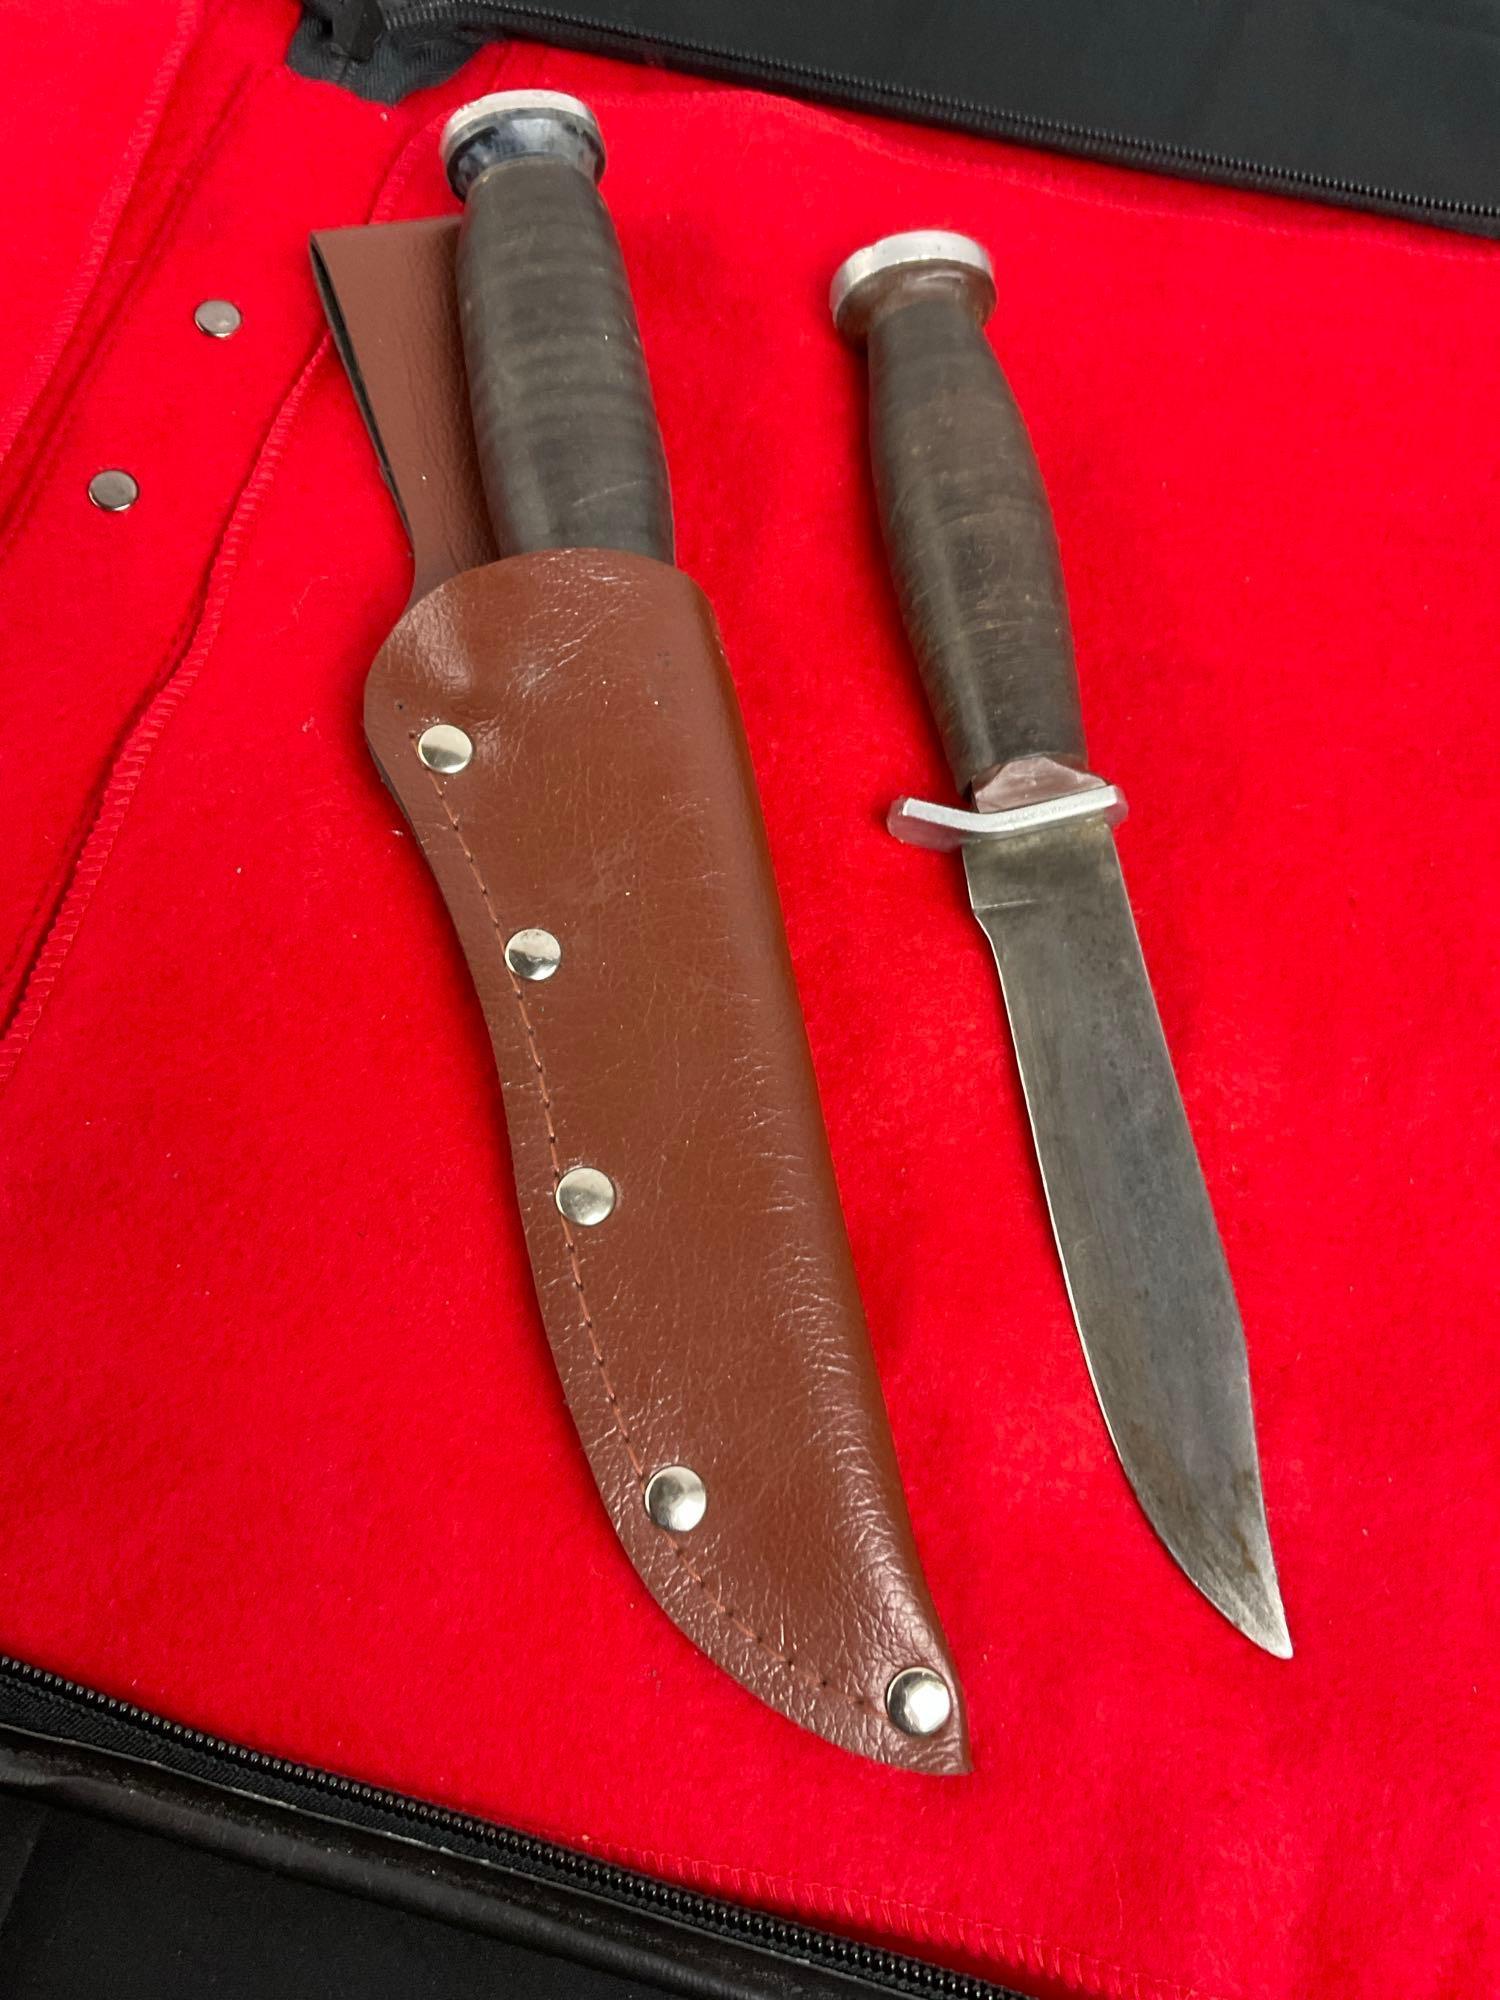 2x Vintage Craftsman Fixed Blade Knives - Both have 5" Blades - See pics